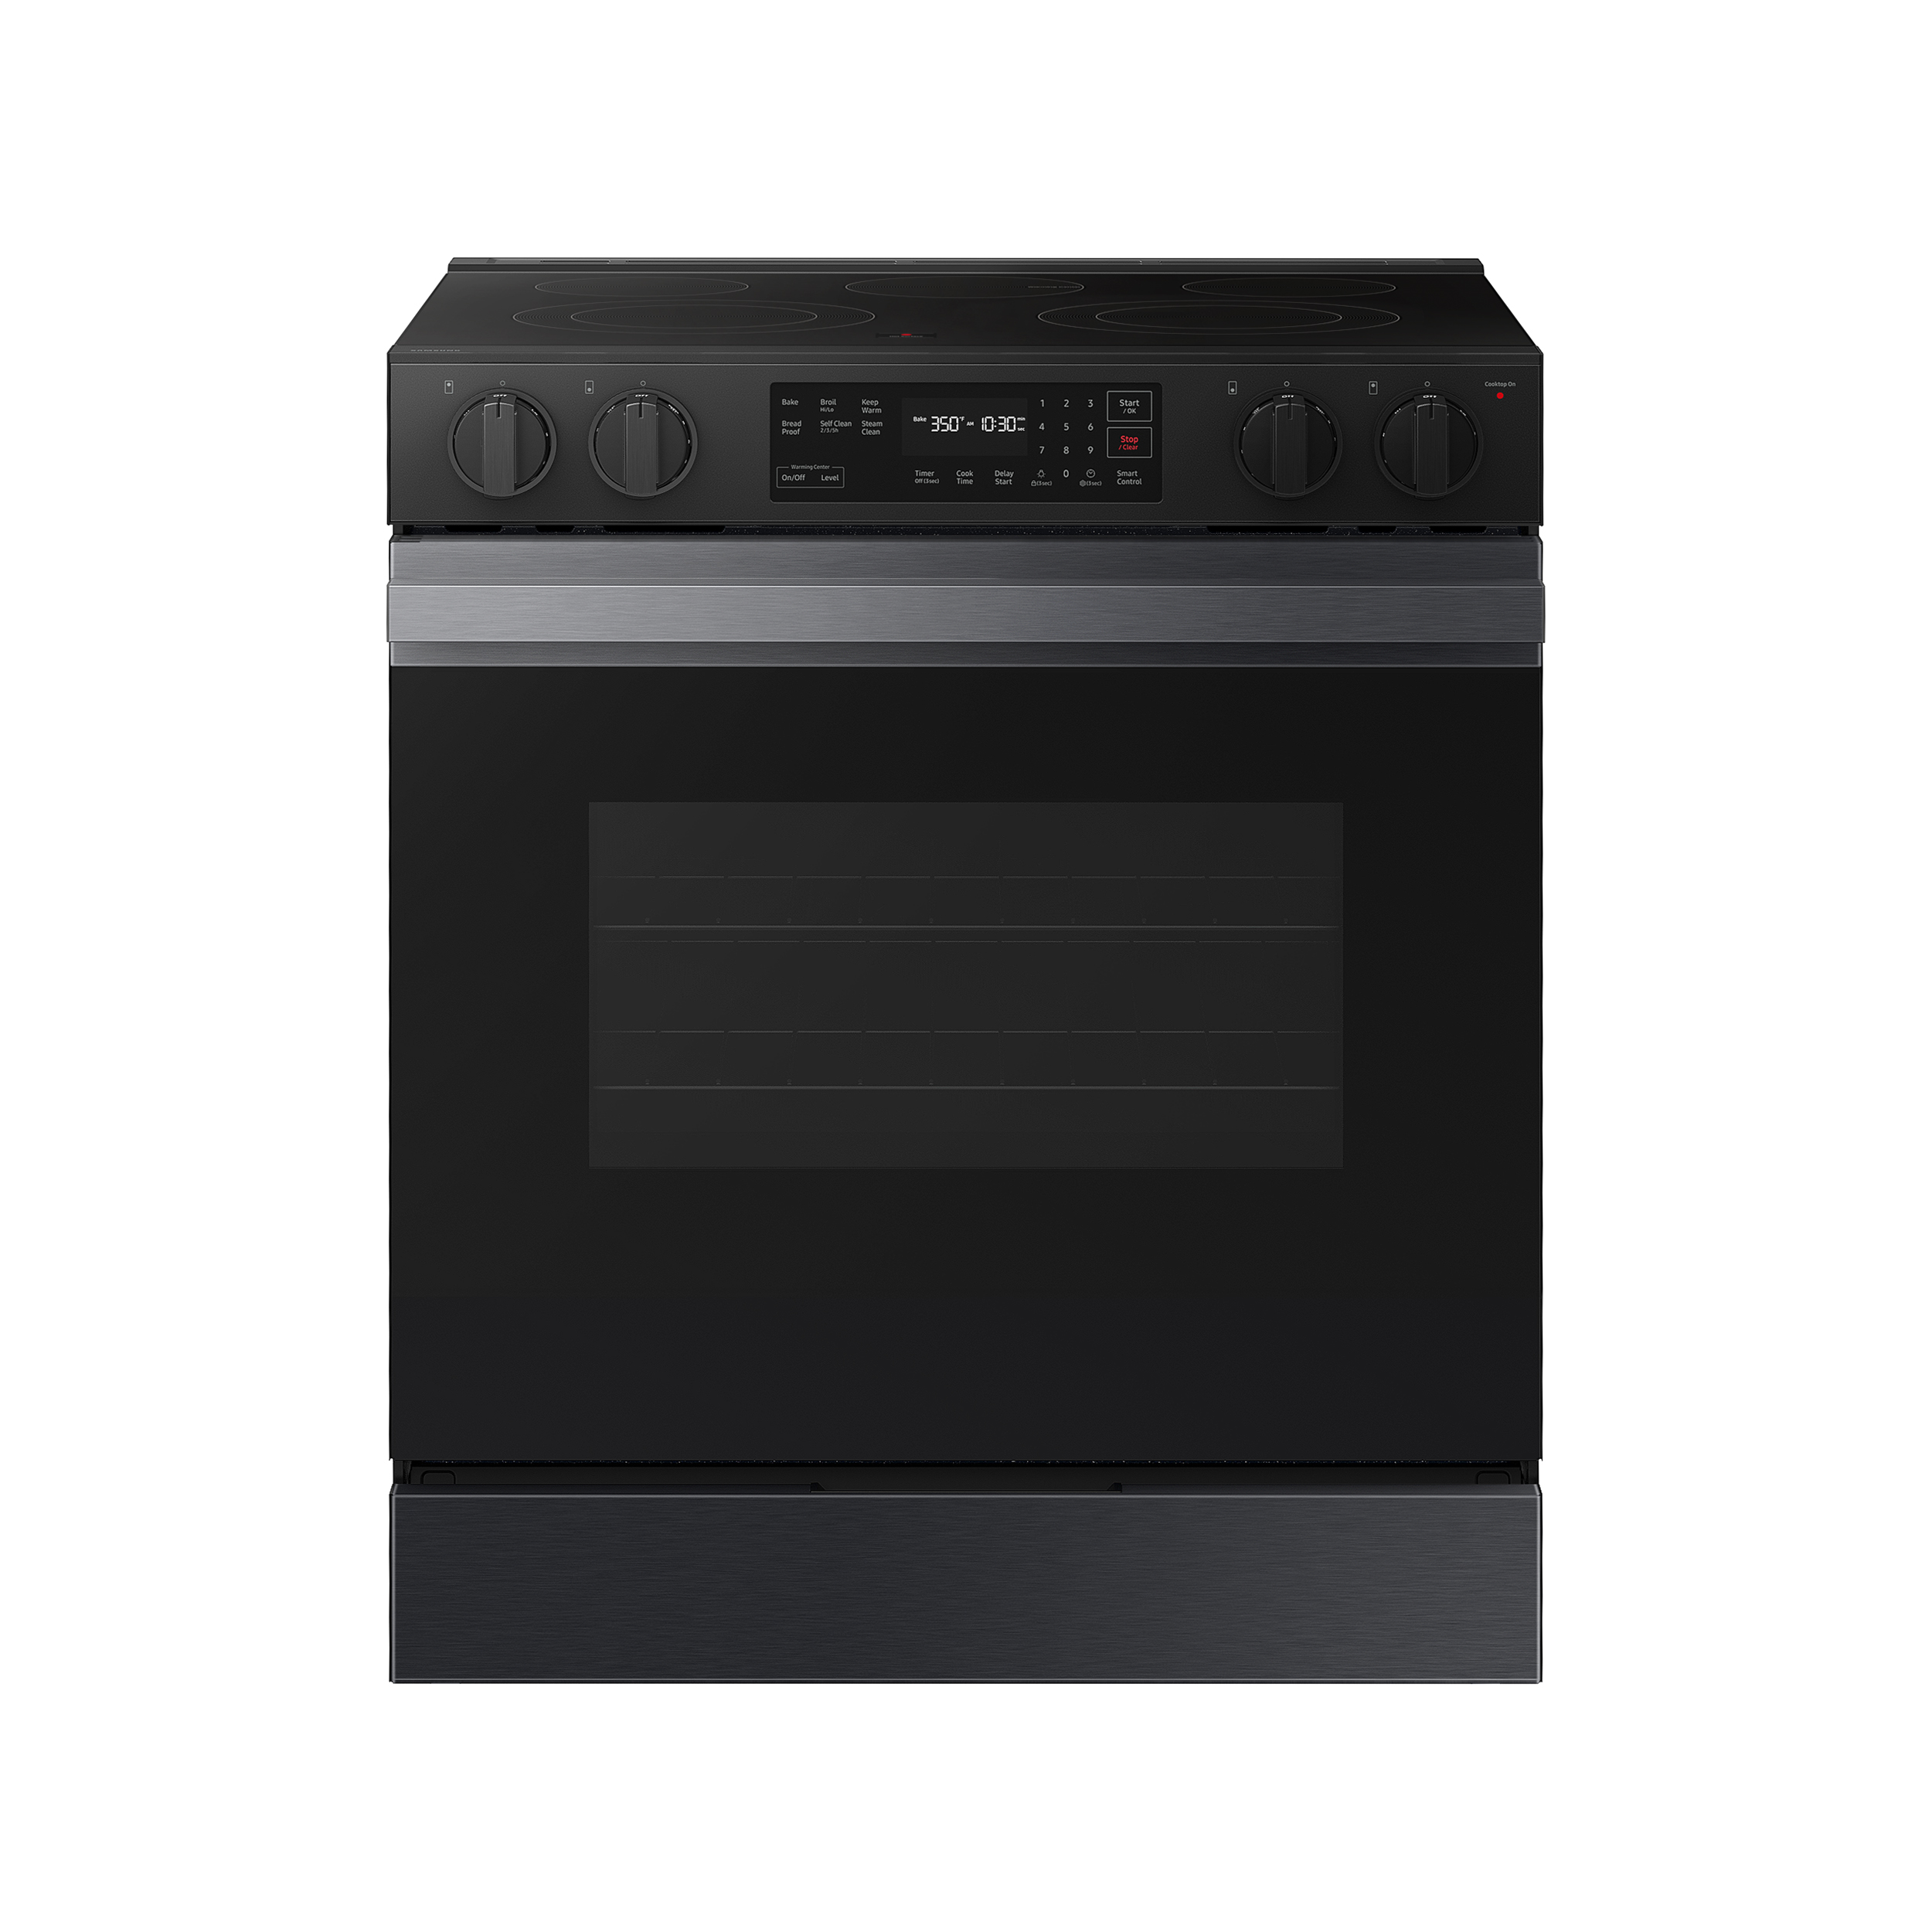 Thumbnail image of Bespoke 6.3 cu. ft. Smart Slide-In Electric Range with Precision Knobs in Matte Black Steel